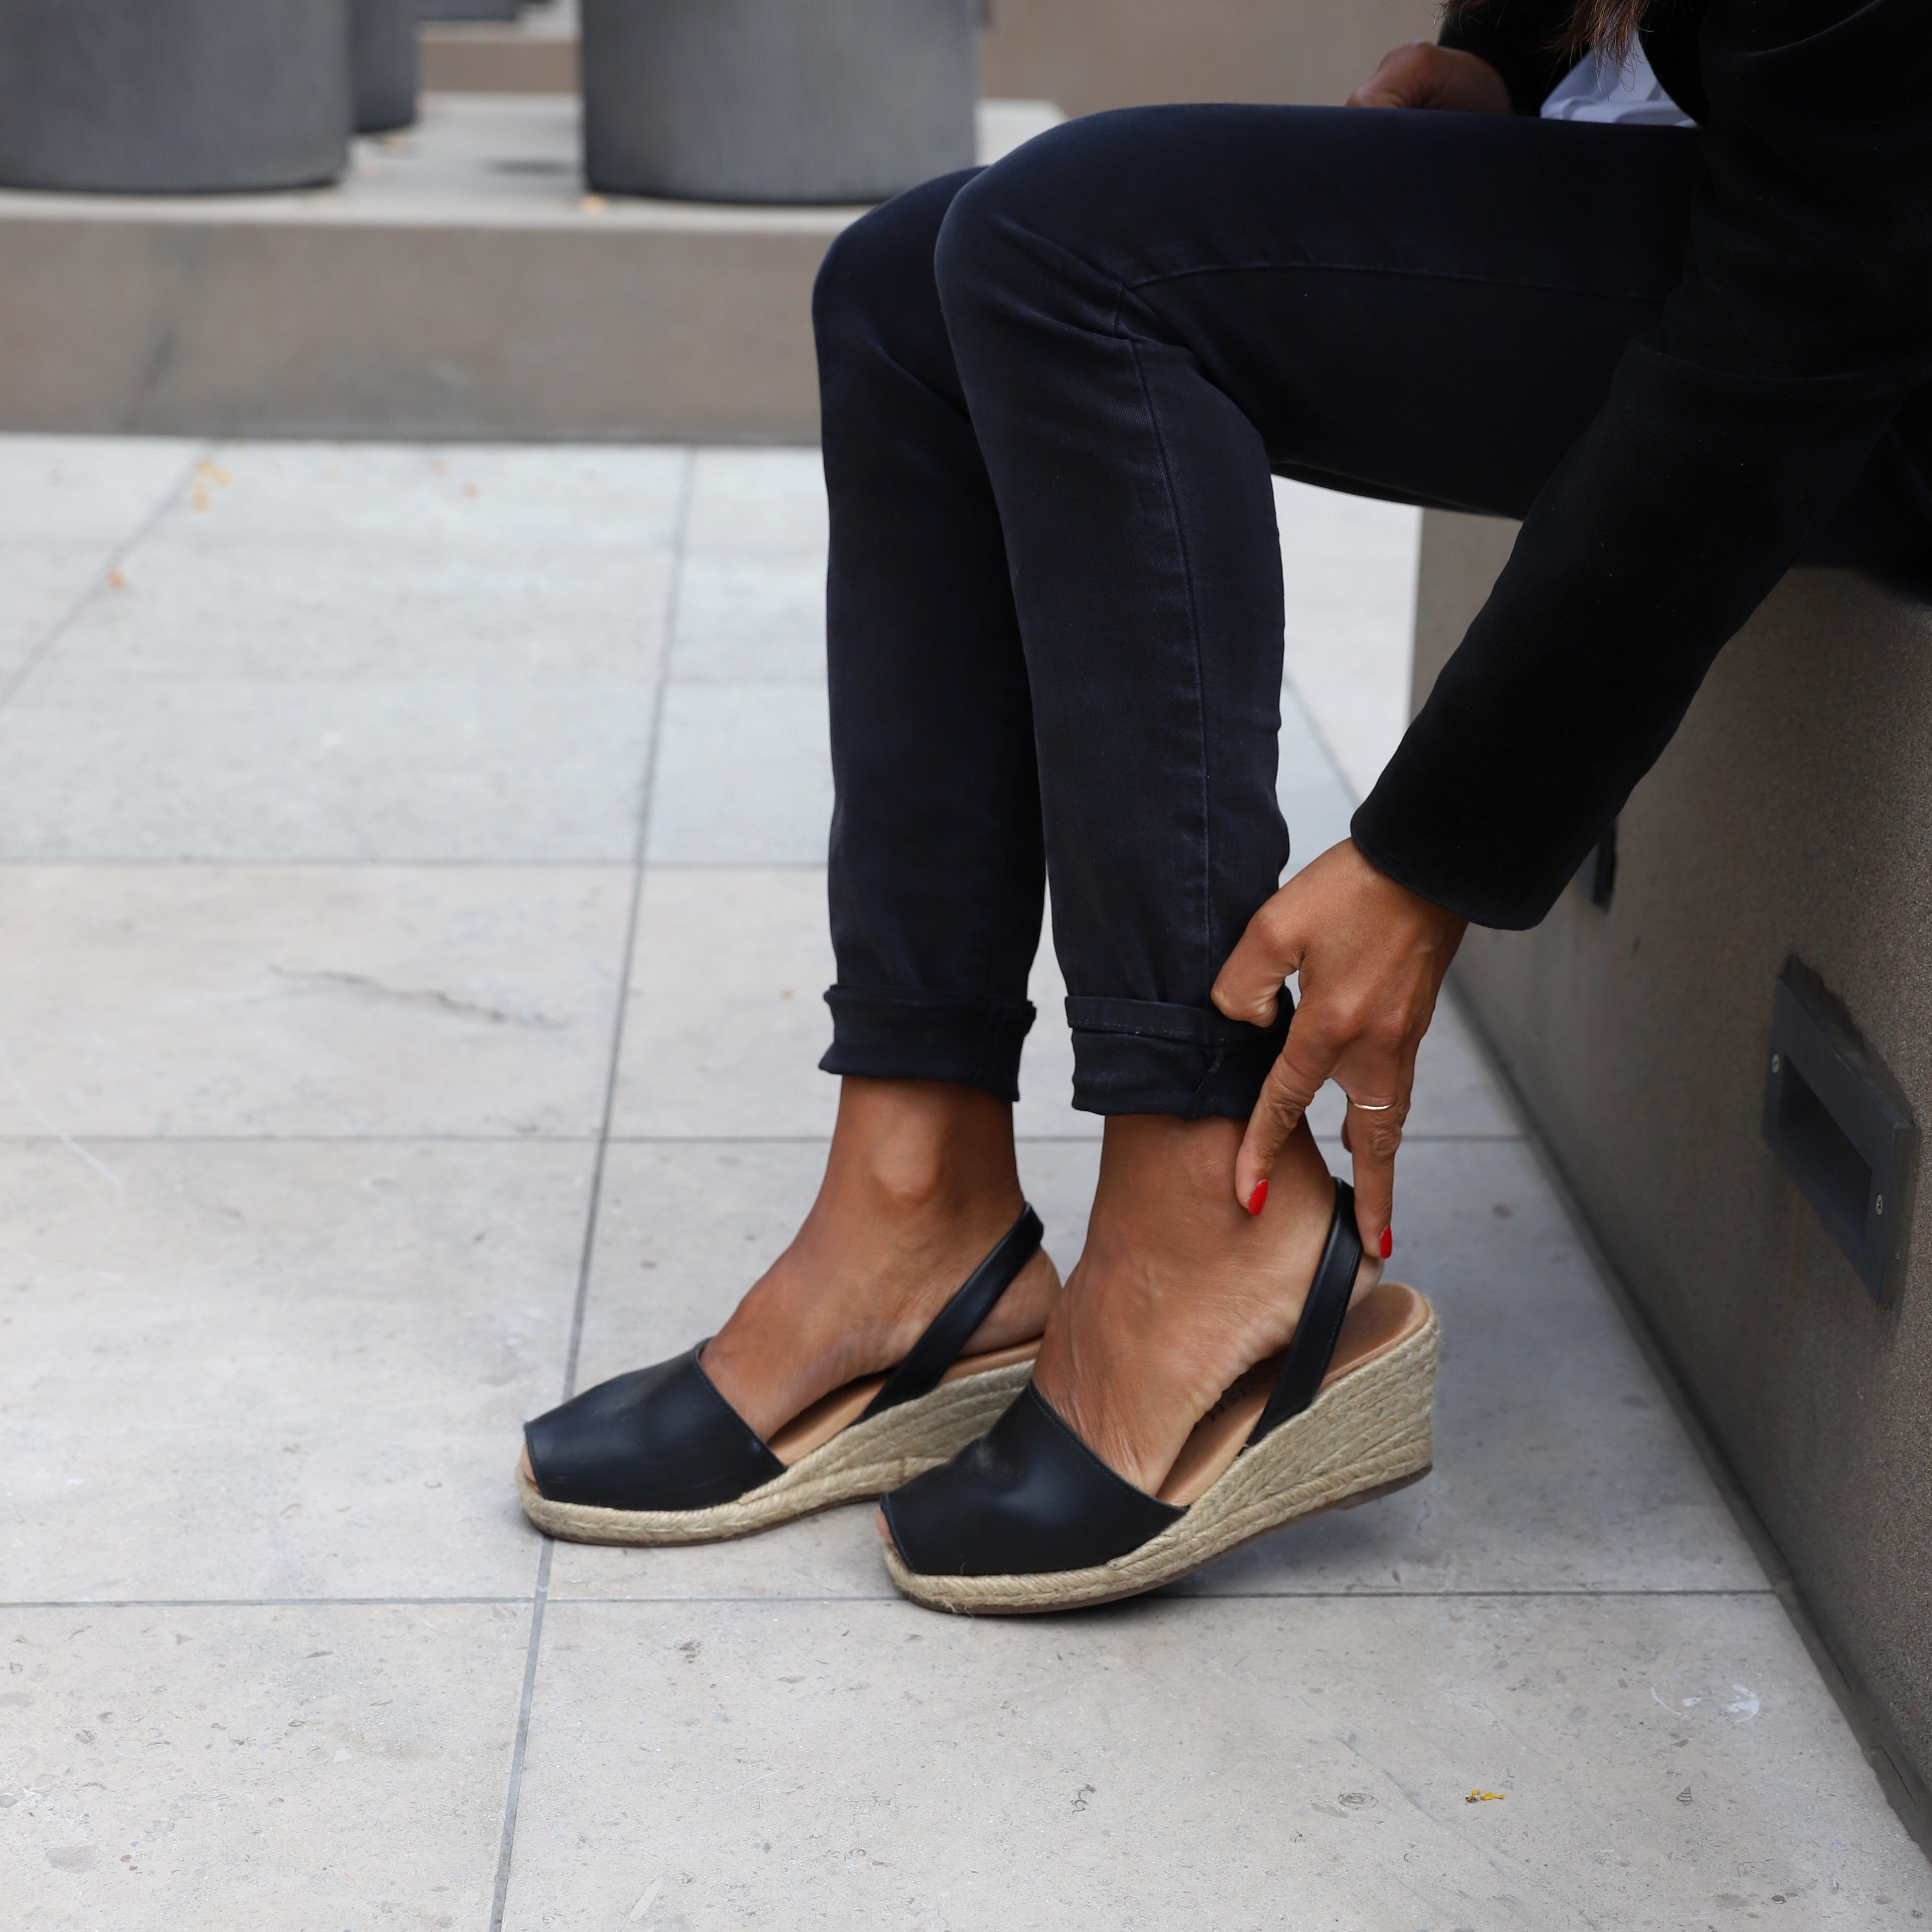 woman sitting down wearing black pants and putting on wedge espadrille sandals in black